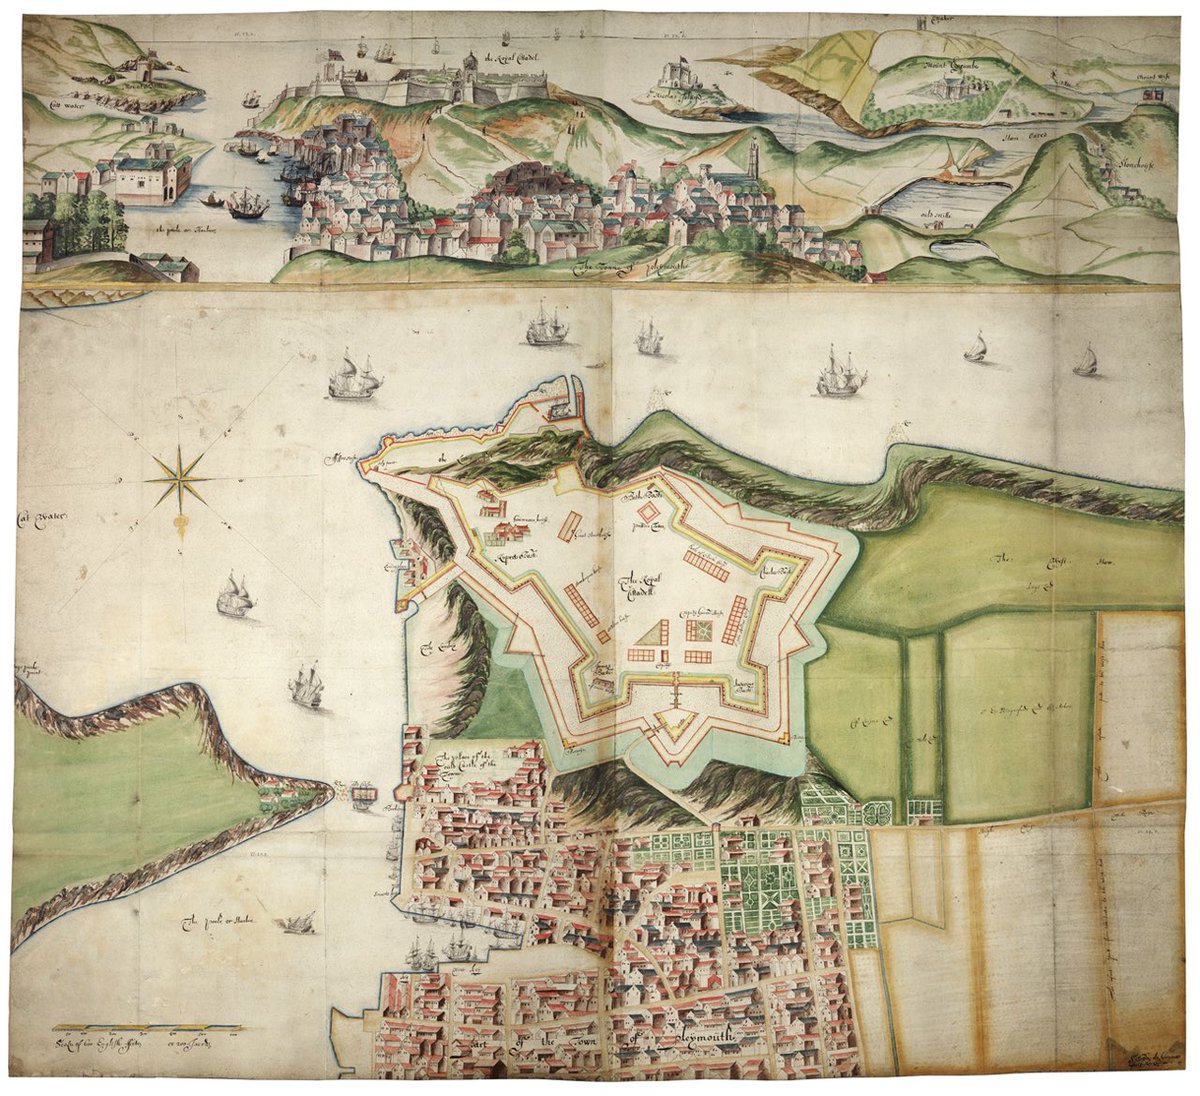 2/2 Bernard de Gomme's plan for Plymouth citadel, completed just before Danckerts painted it.